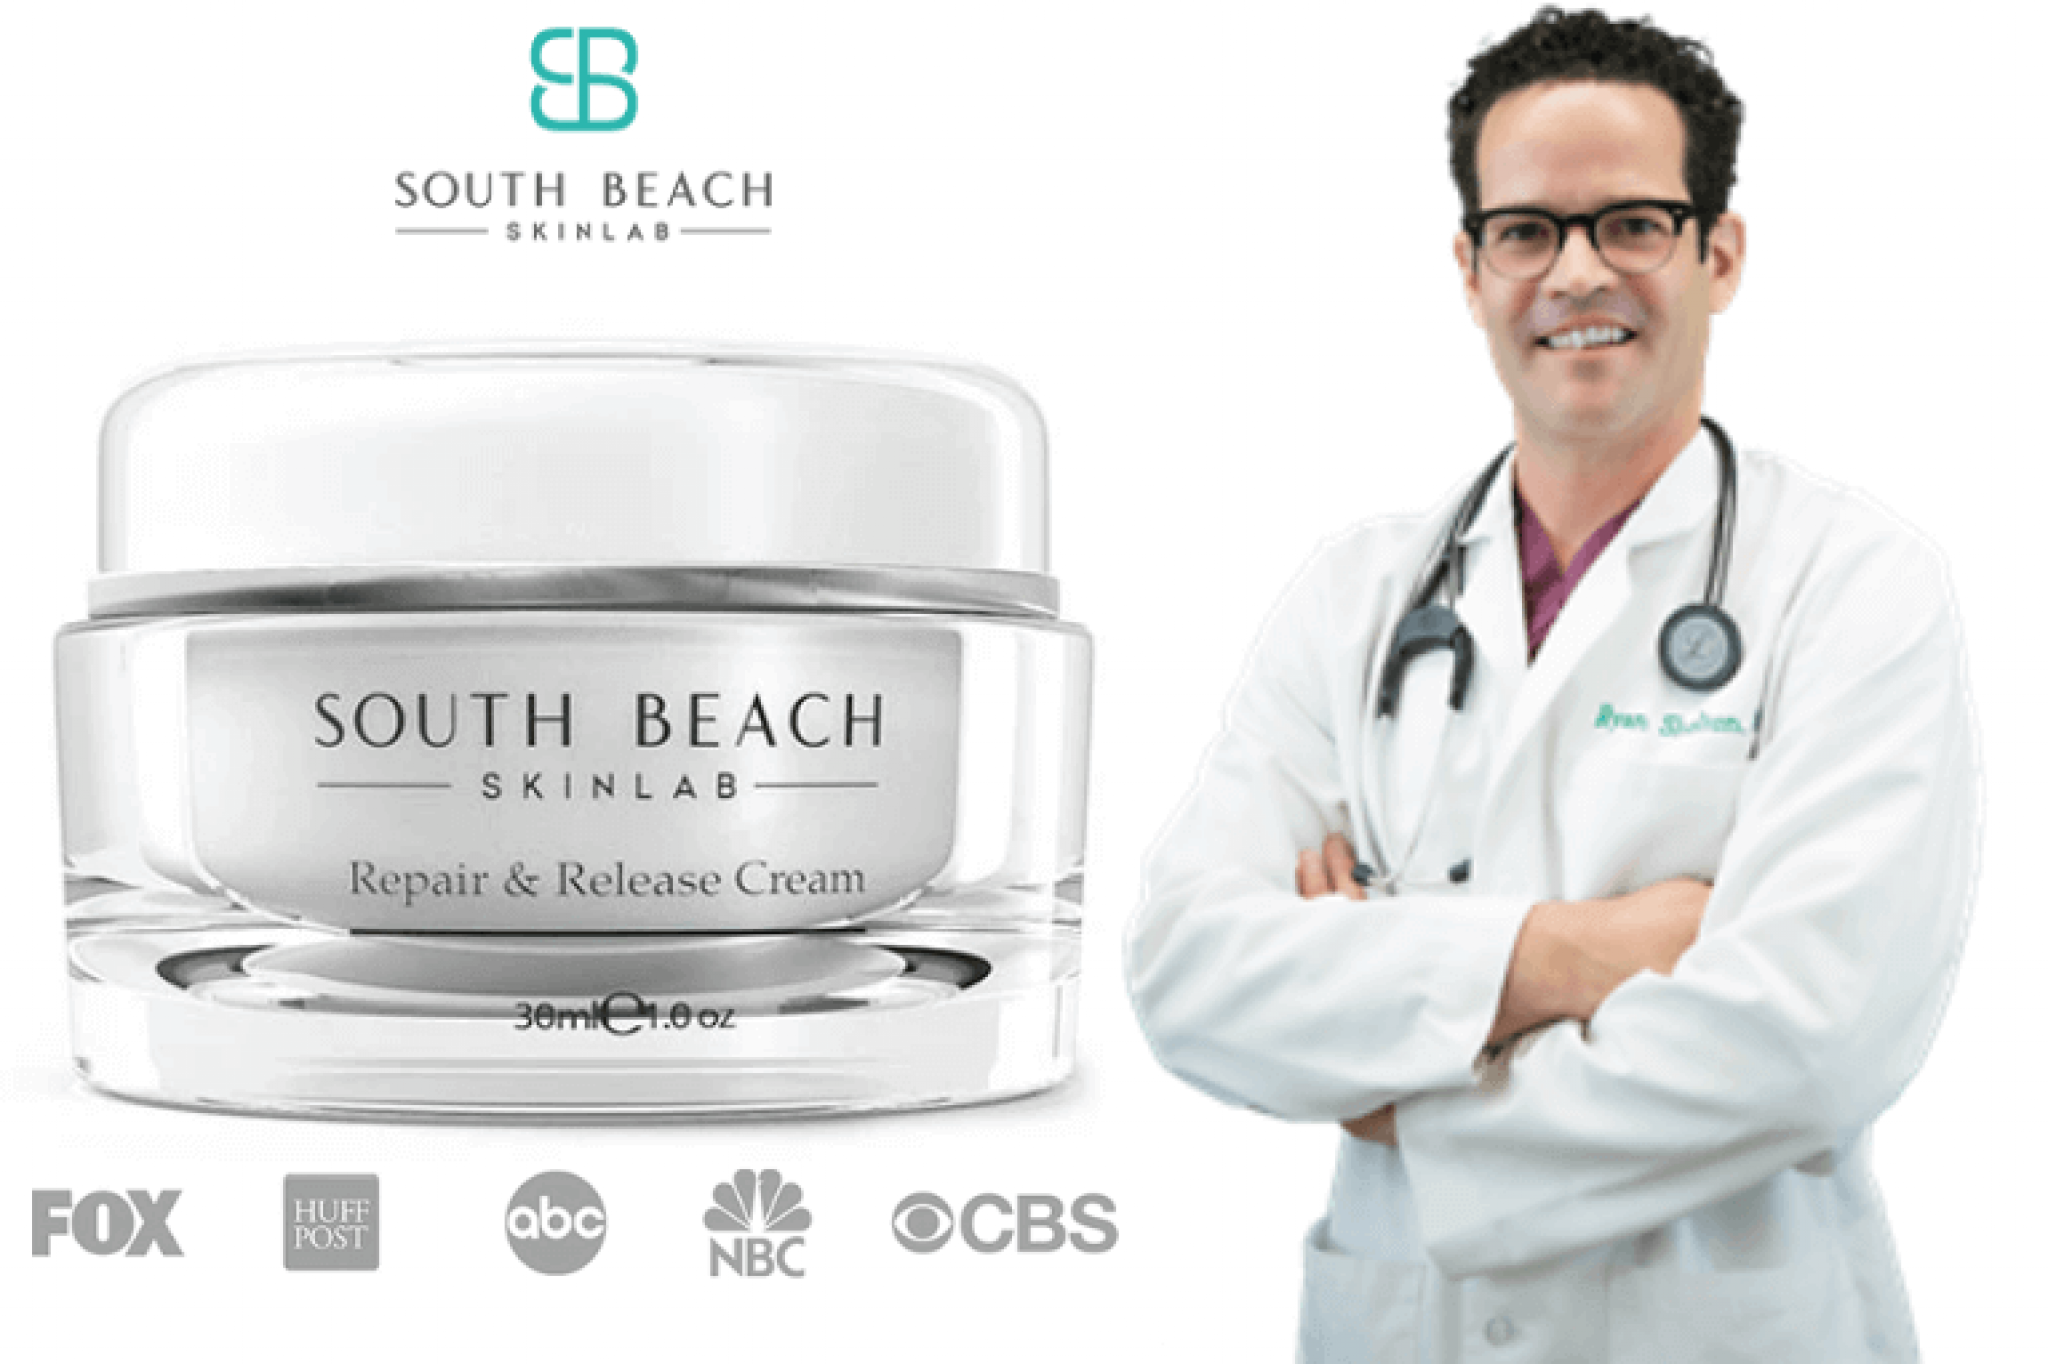 South Beach Skin Lab Review: Repair and Release Beauty Cream Work Or